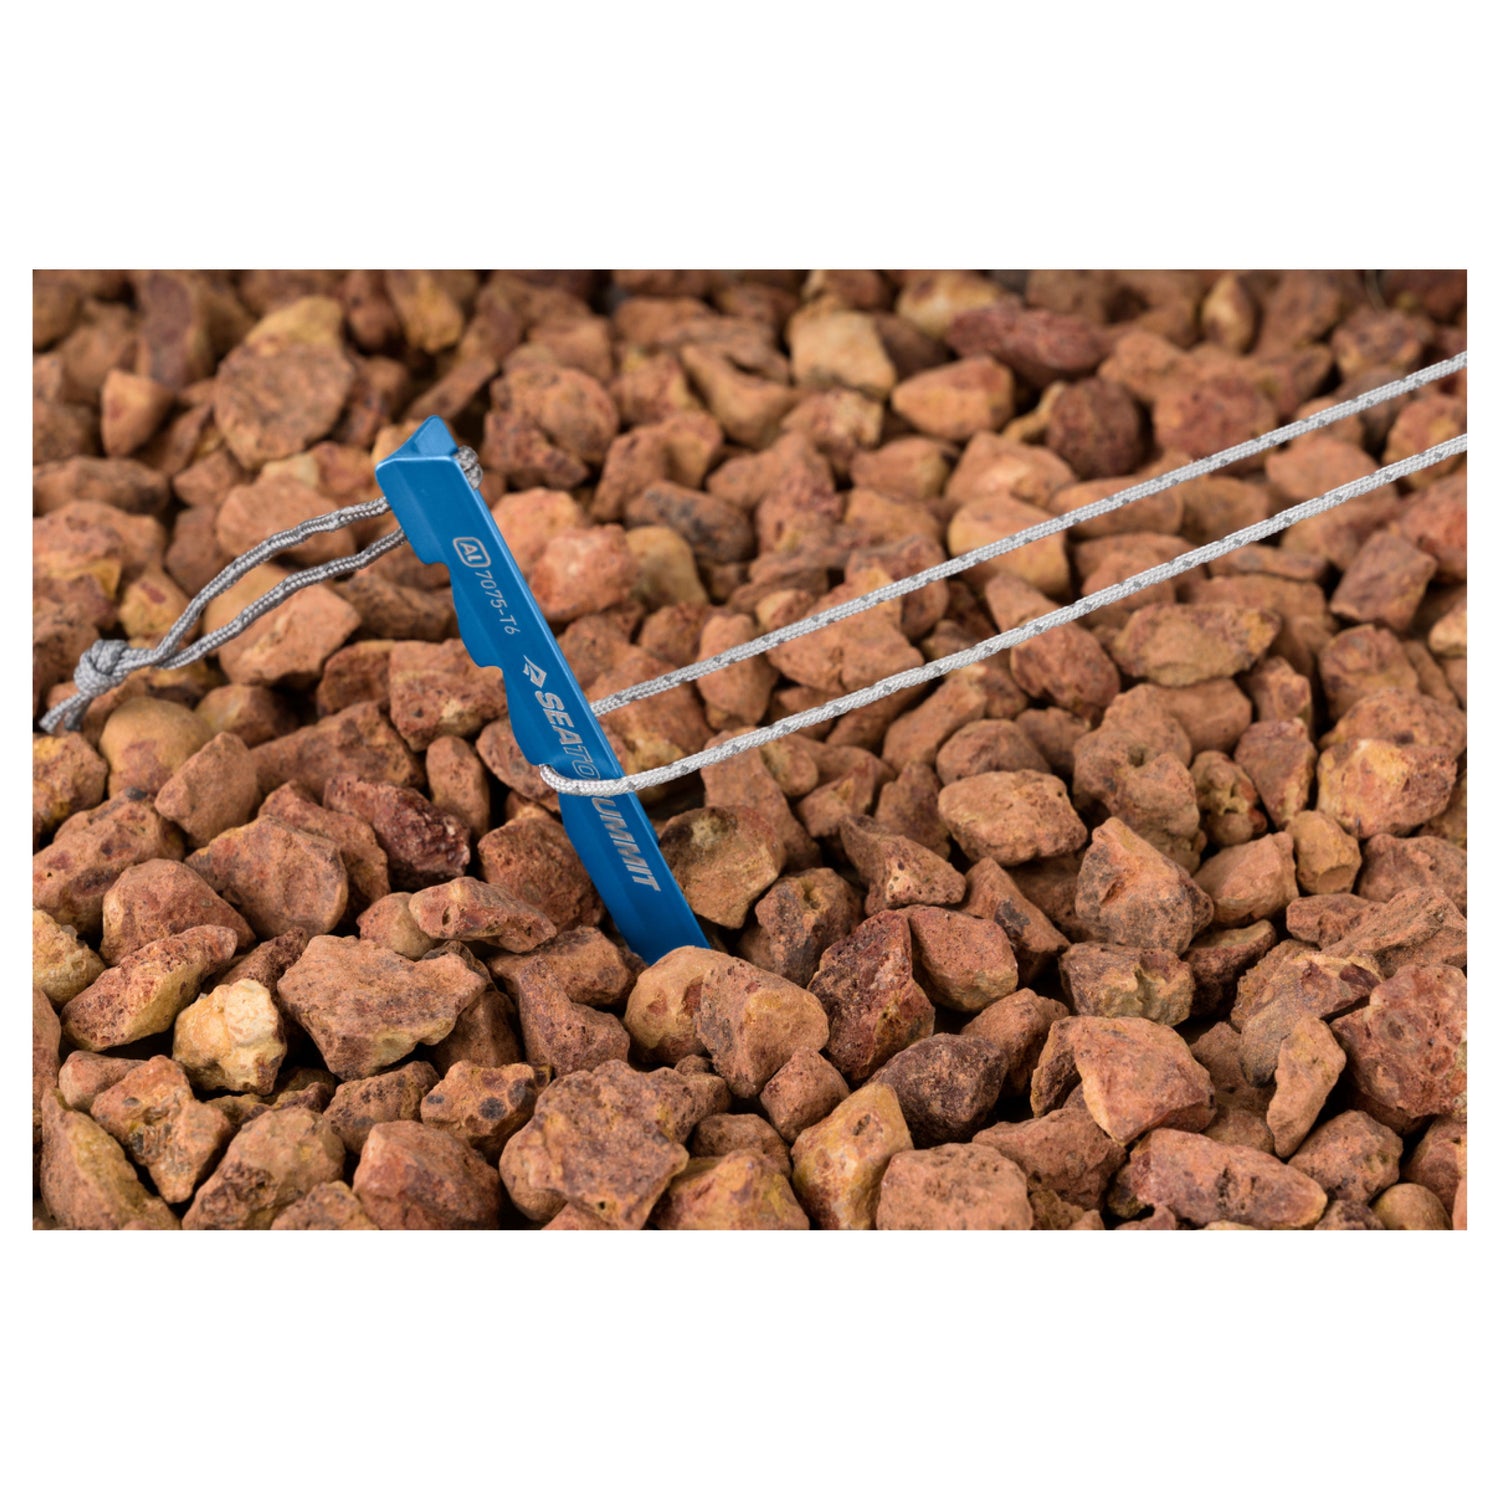 Ground Control Light Tent Pegs (6 Pack)